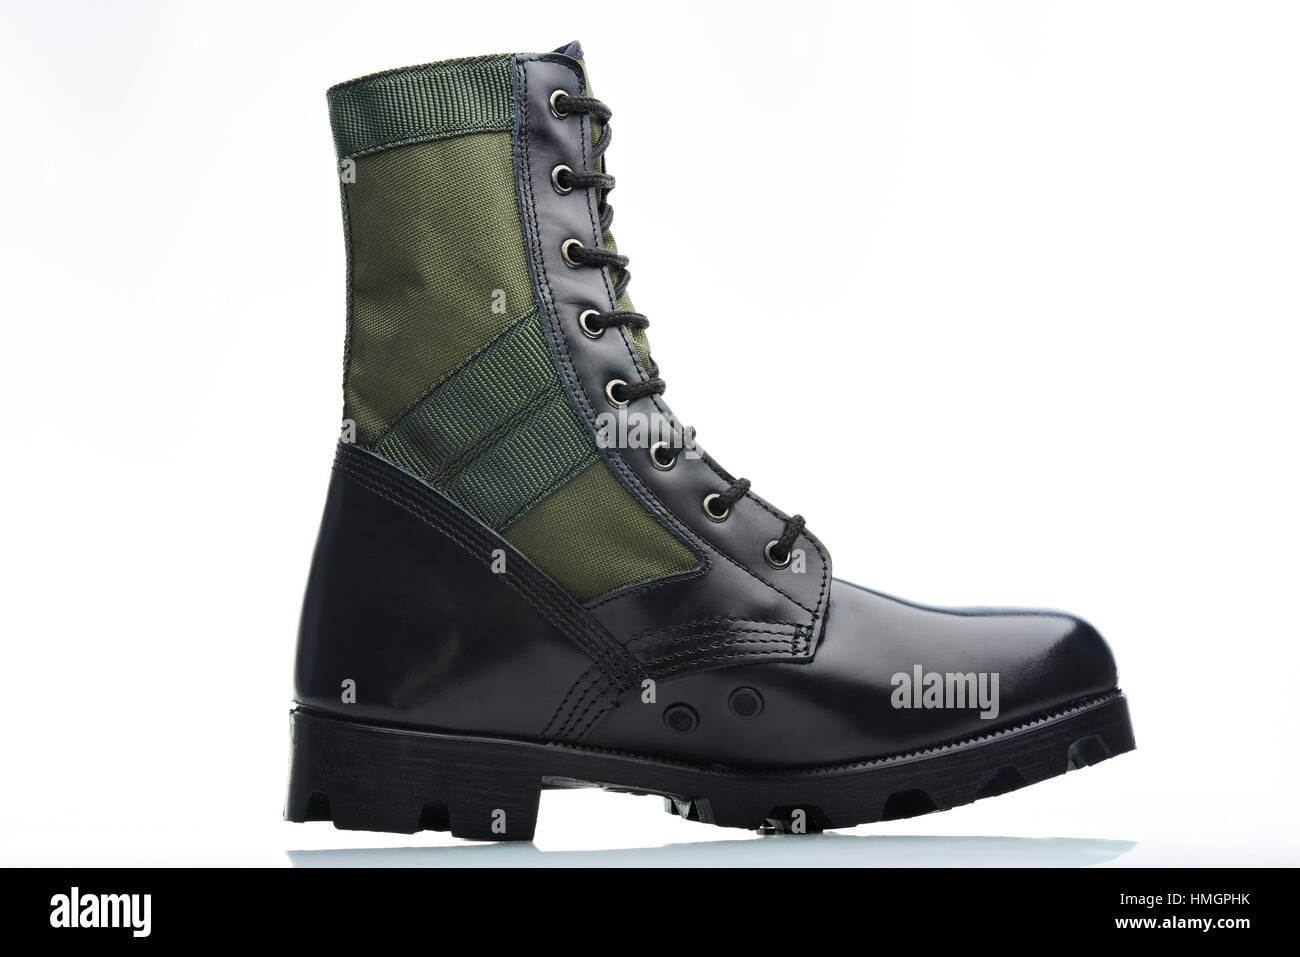 tall men leather green black boot military style Stock Photo - Alamy